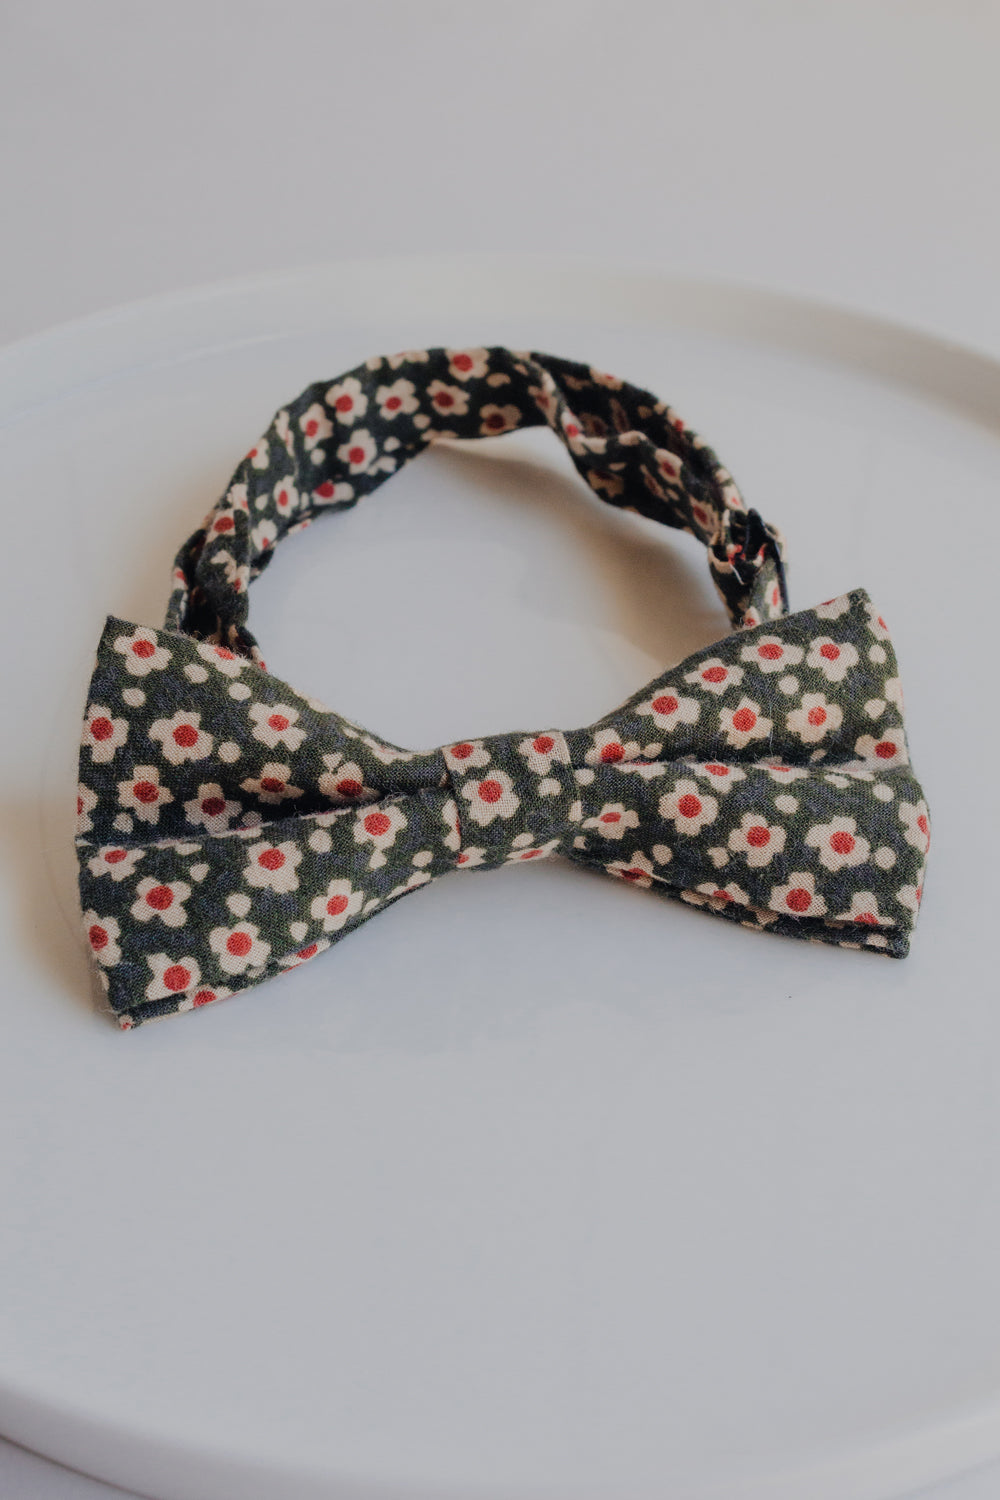 Small Flower Bow Tie